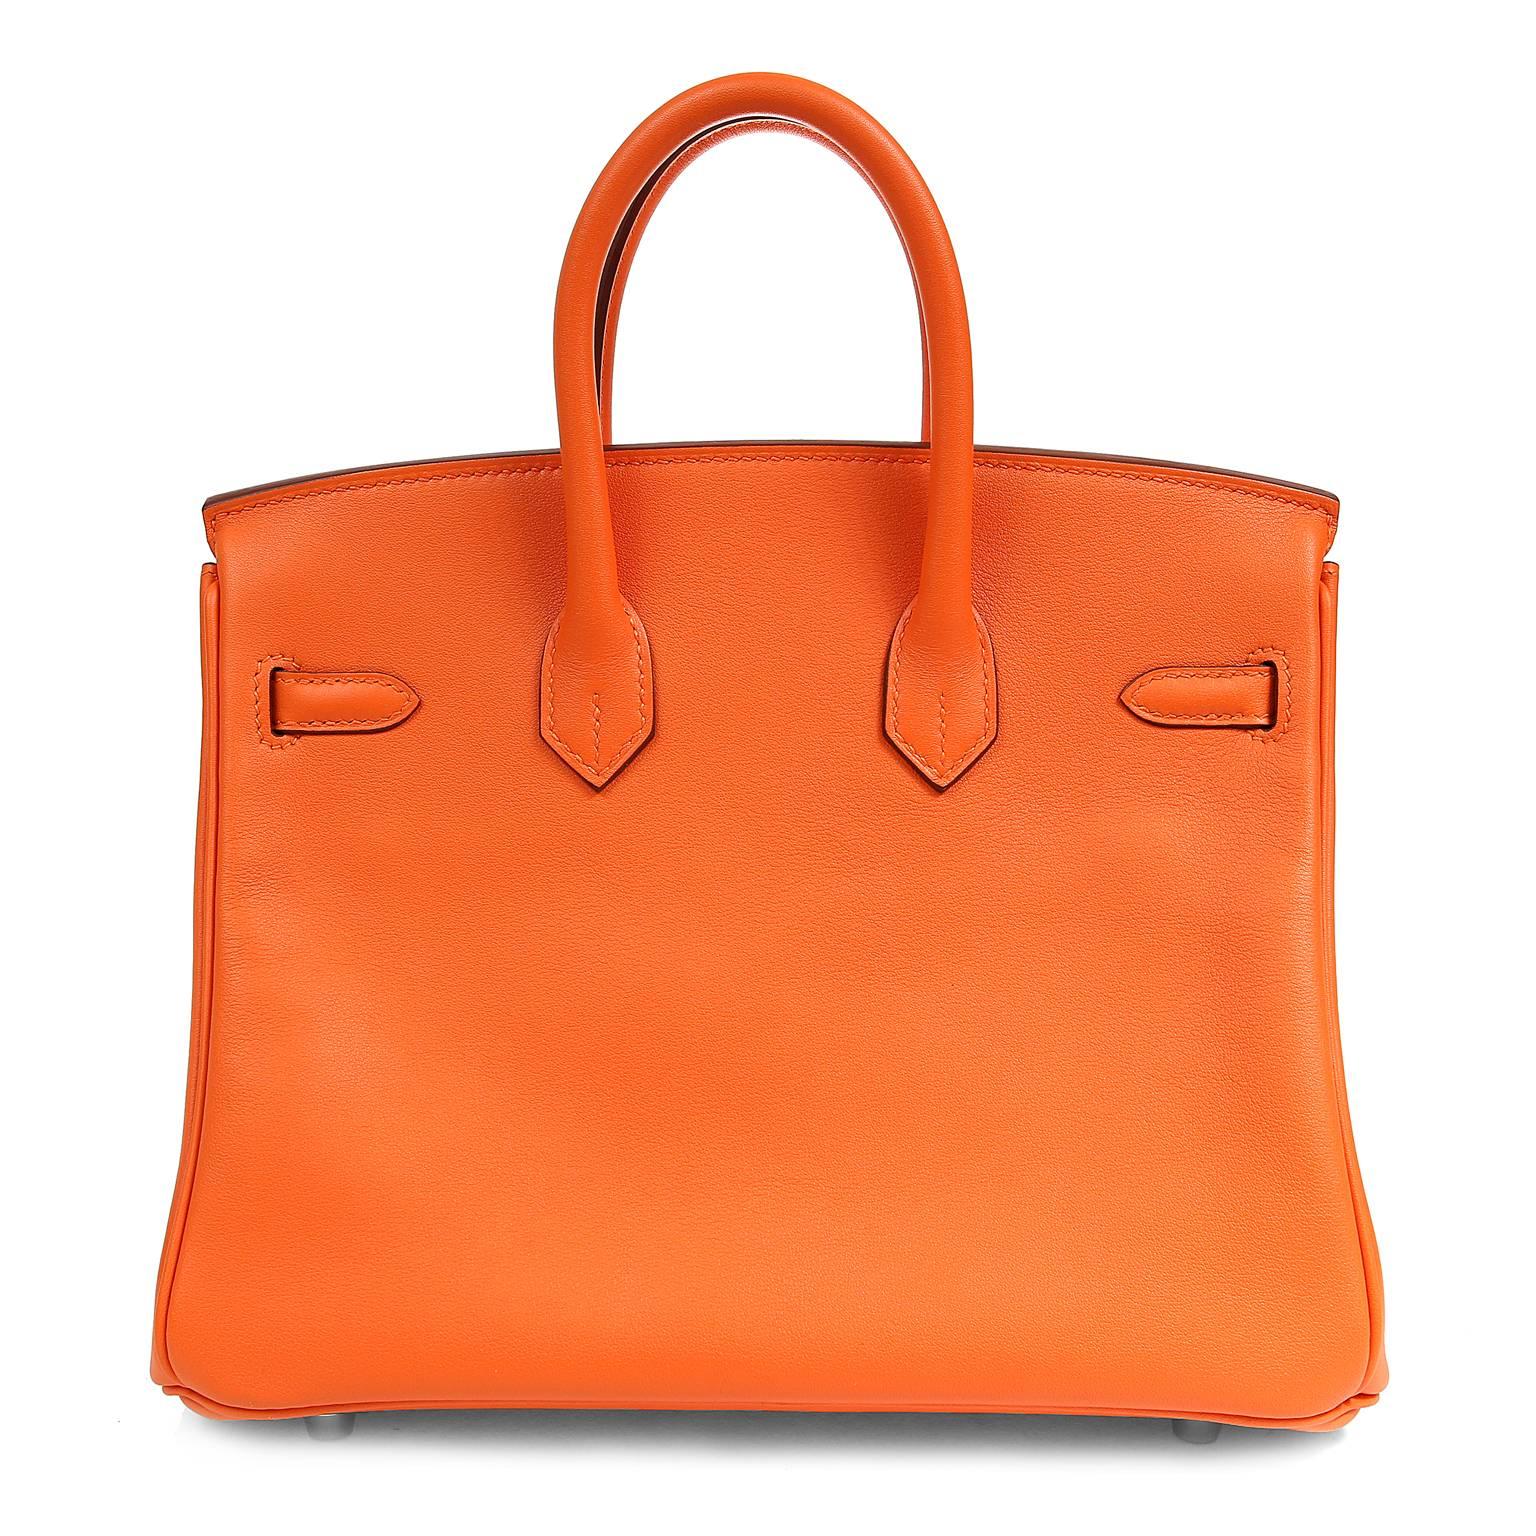  Hermès 25 cm Feu Birkin Bag in Swift leather with Gold hardware- Pristine unworn condition with plastic intact on all hardware.

Waitlists exceeding a year are commonplace for the intensely coveted Birkin bag.  Each piece is hand sewn by skilled